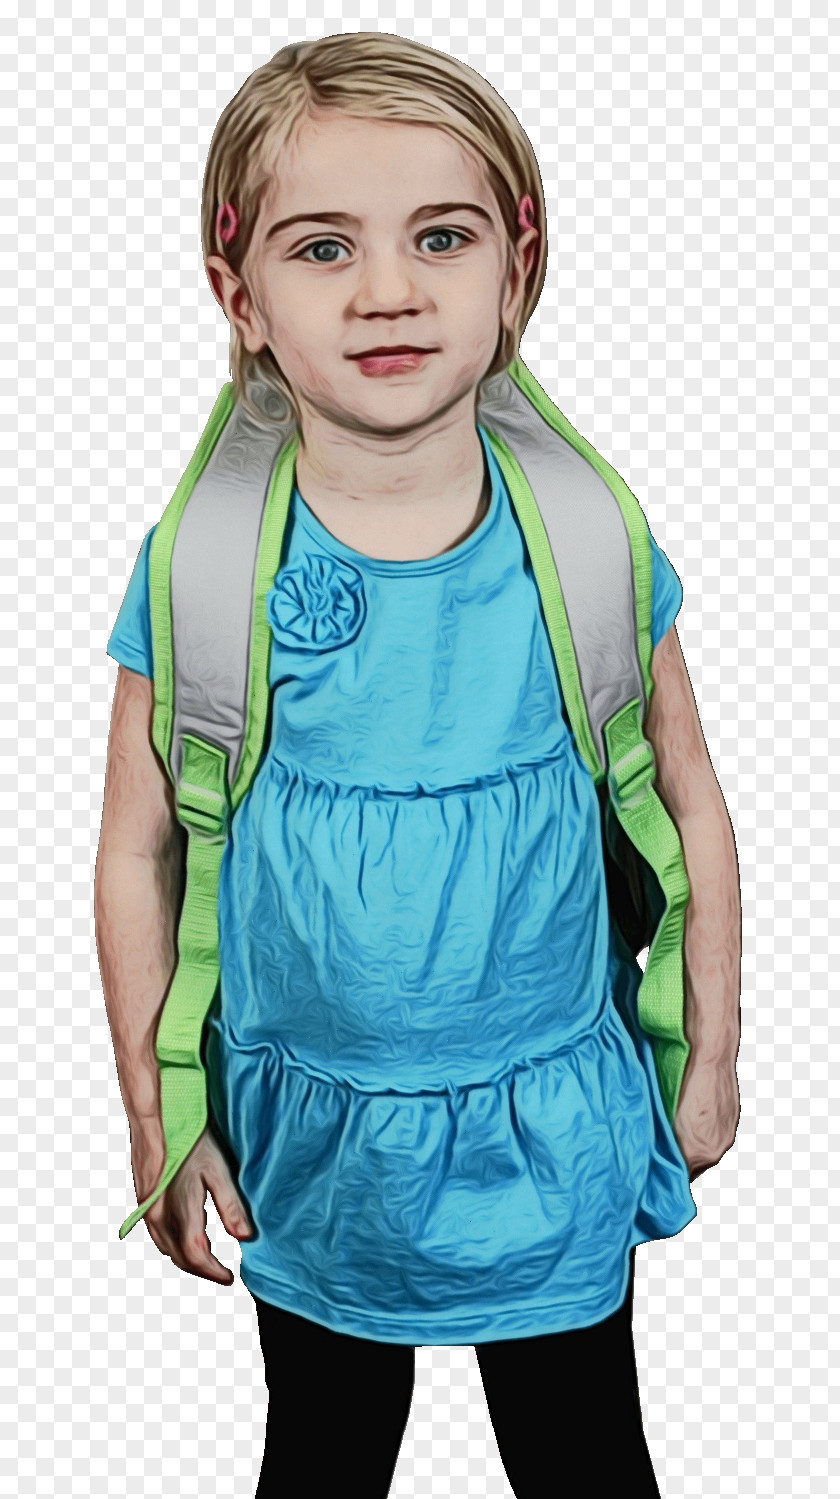 Turquoise Child Tshirt Clothing PNG